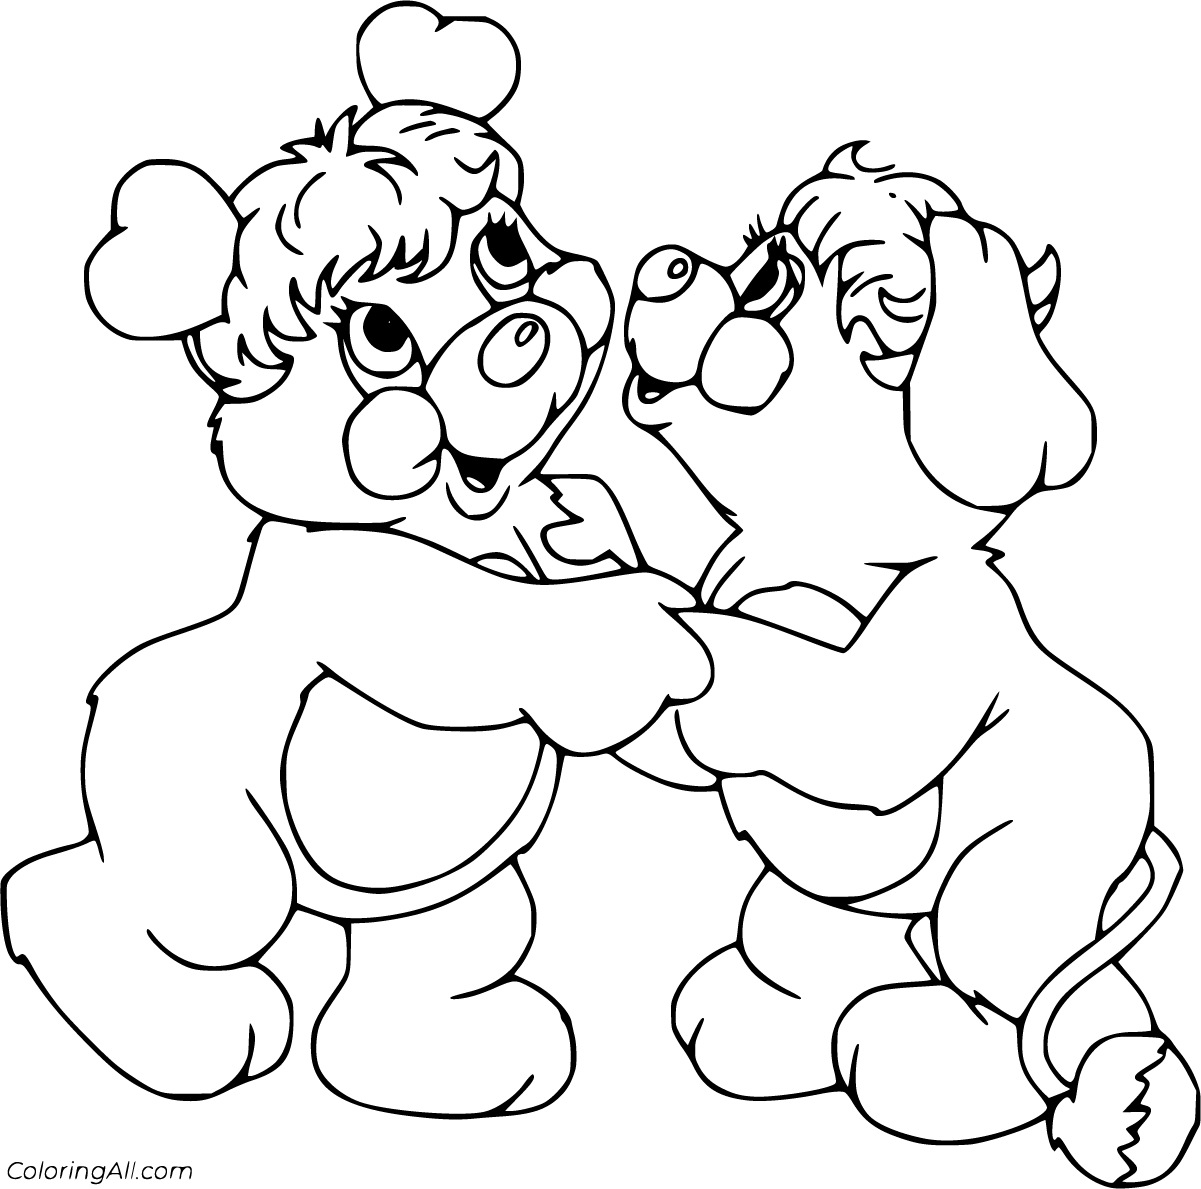 Popples Coloring Pages - ColoringAll